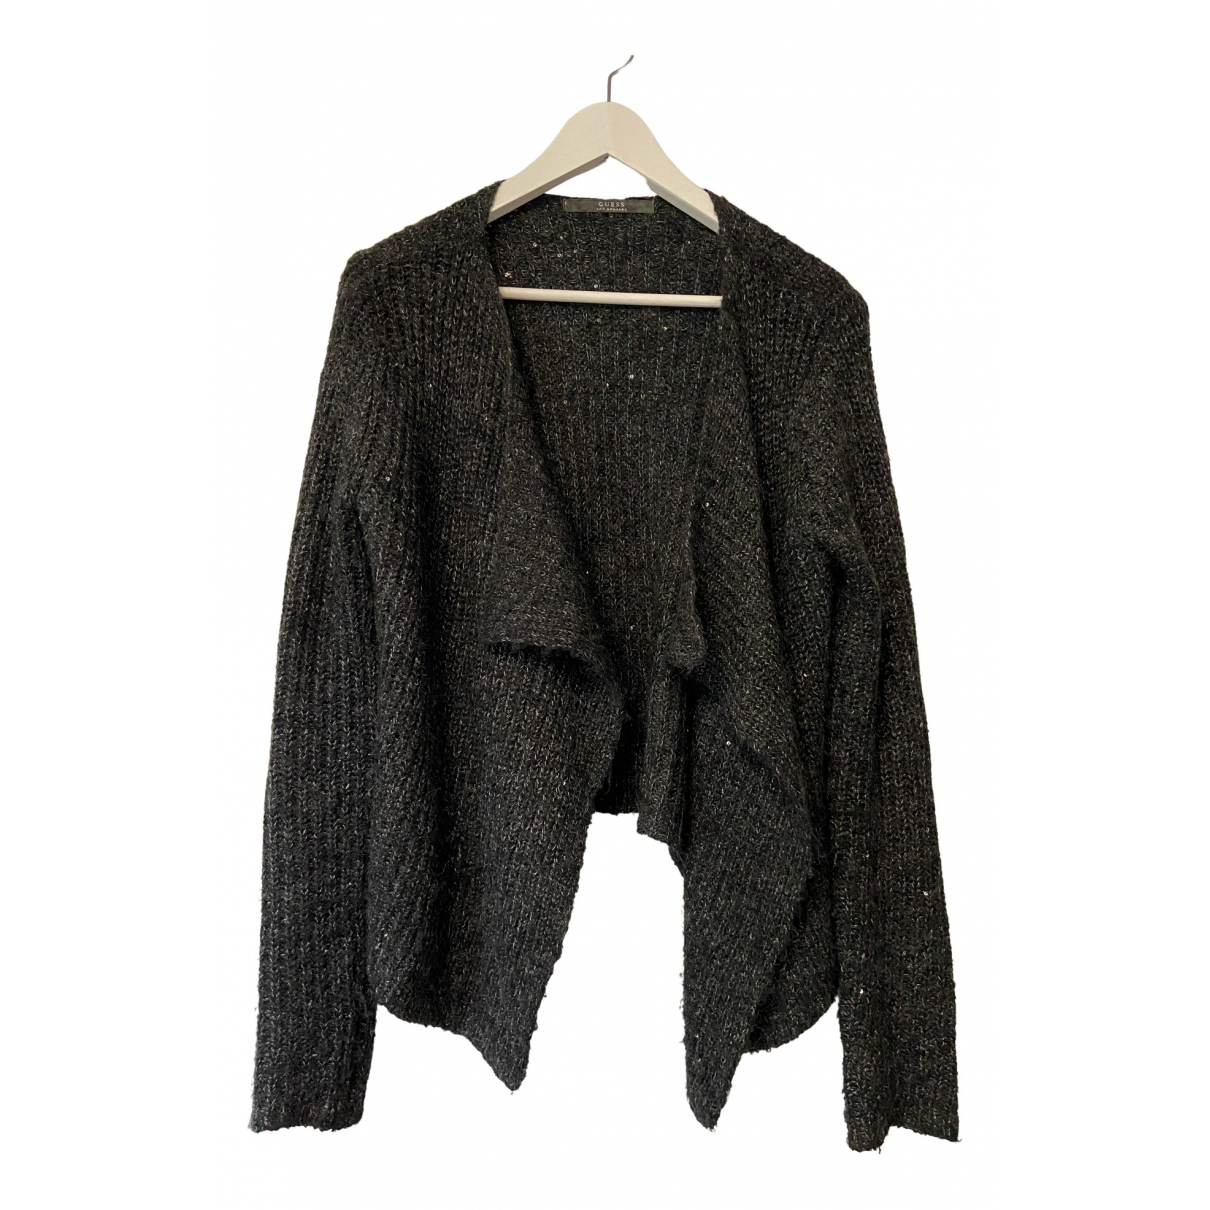 Shop Now For The Guess Cardigan | AccuWeather Shop